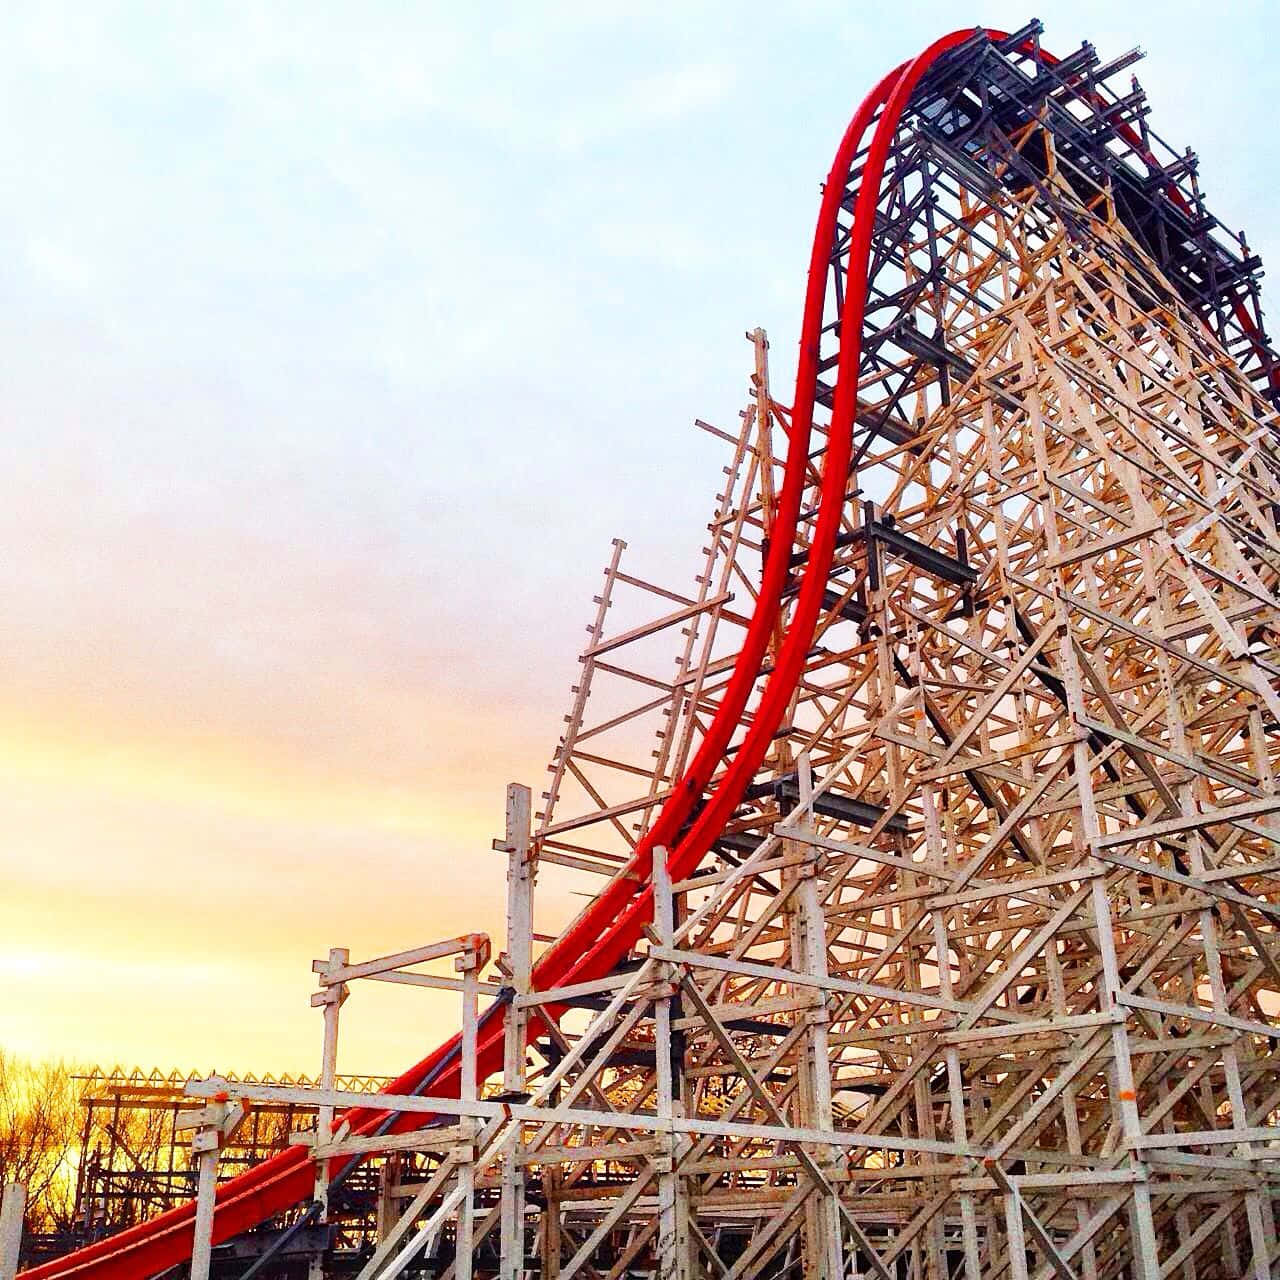 A Roller Coaster With A Red And White Striped Ride